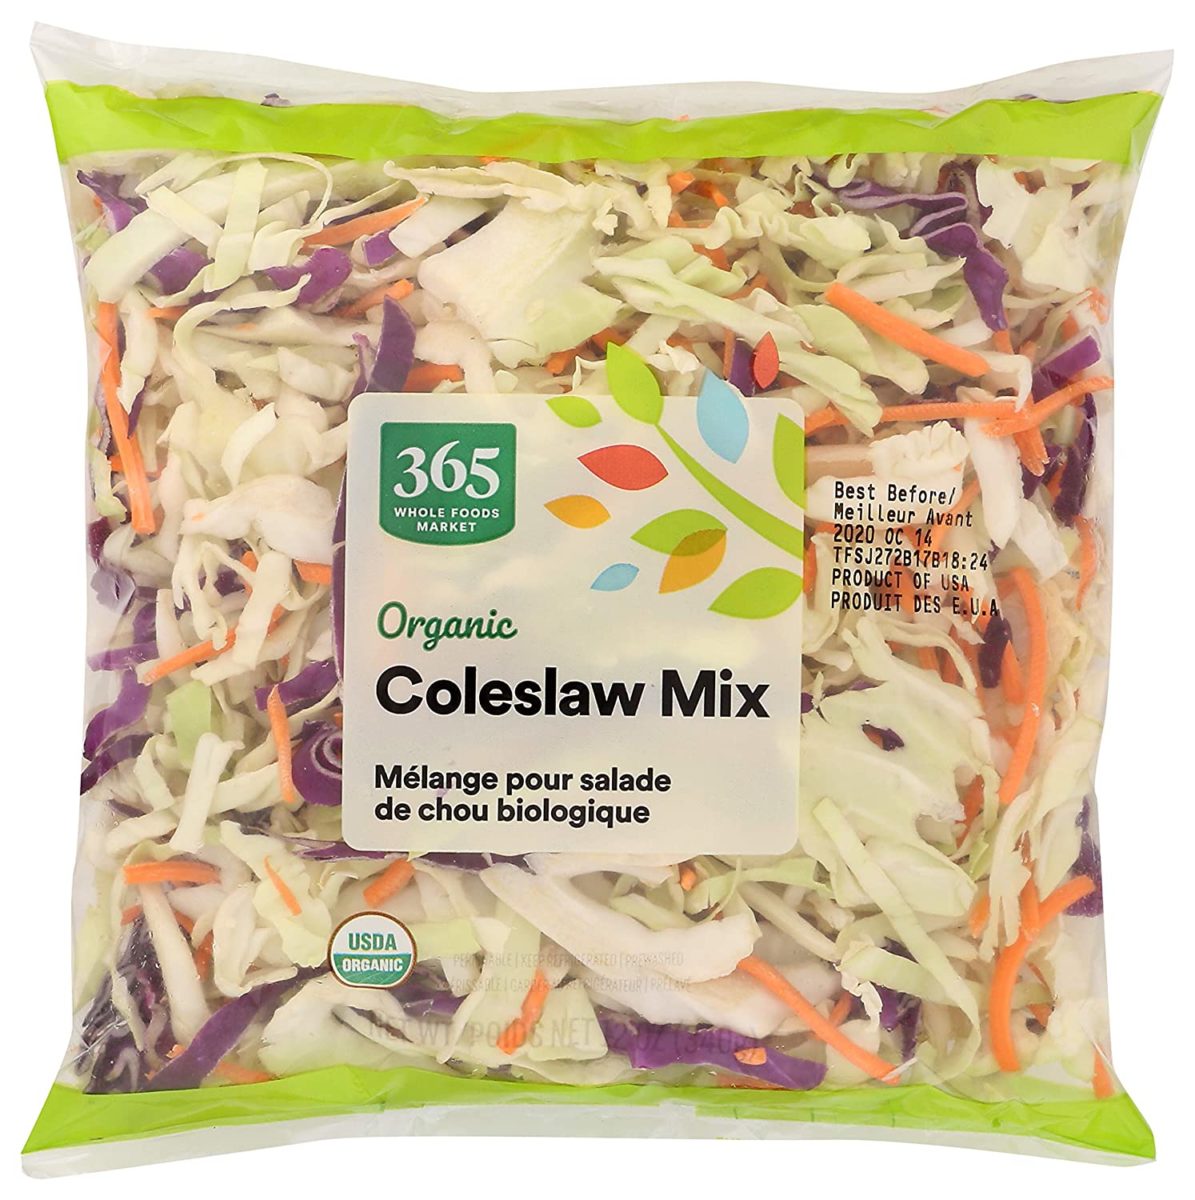 It's Summer Time, Which Means It's Time to Put Coleslaw on Everything